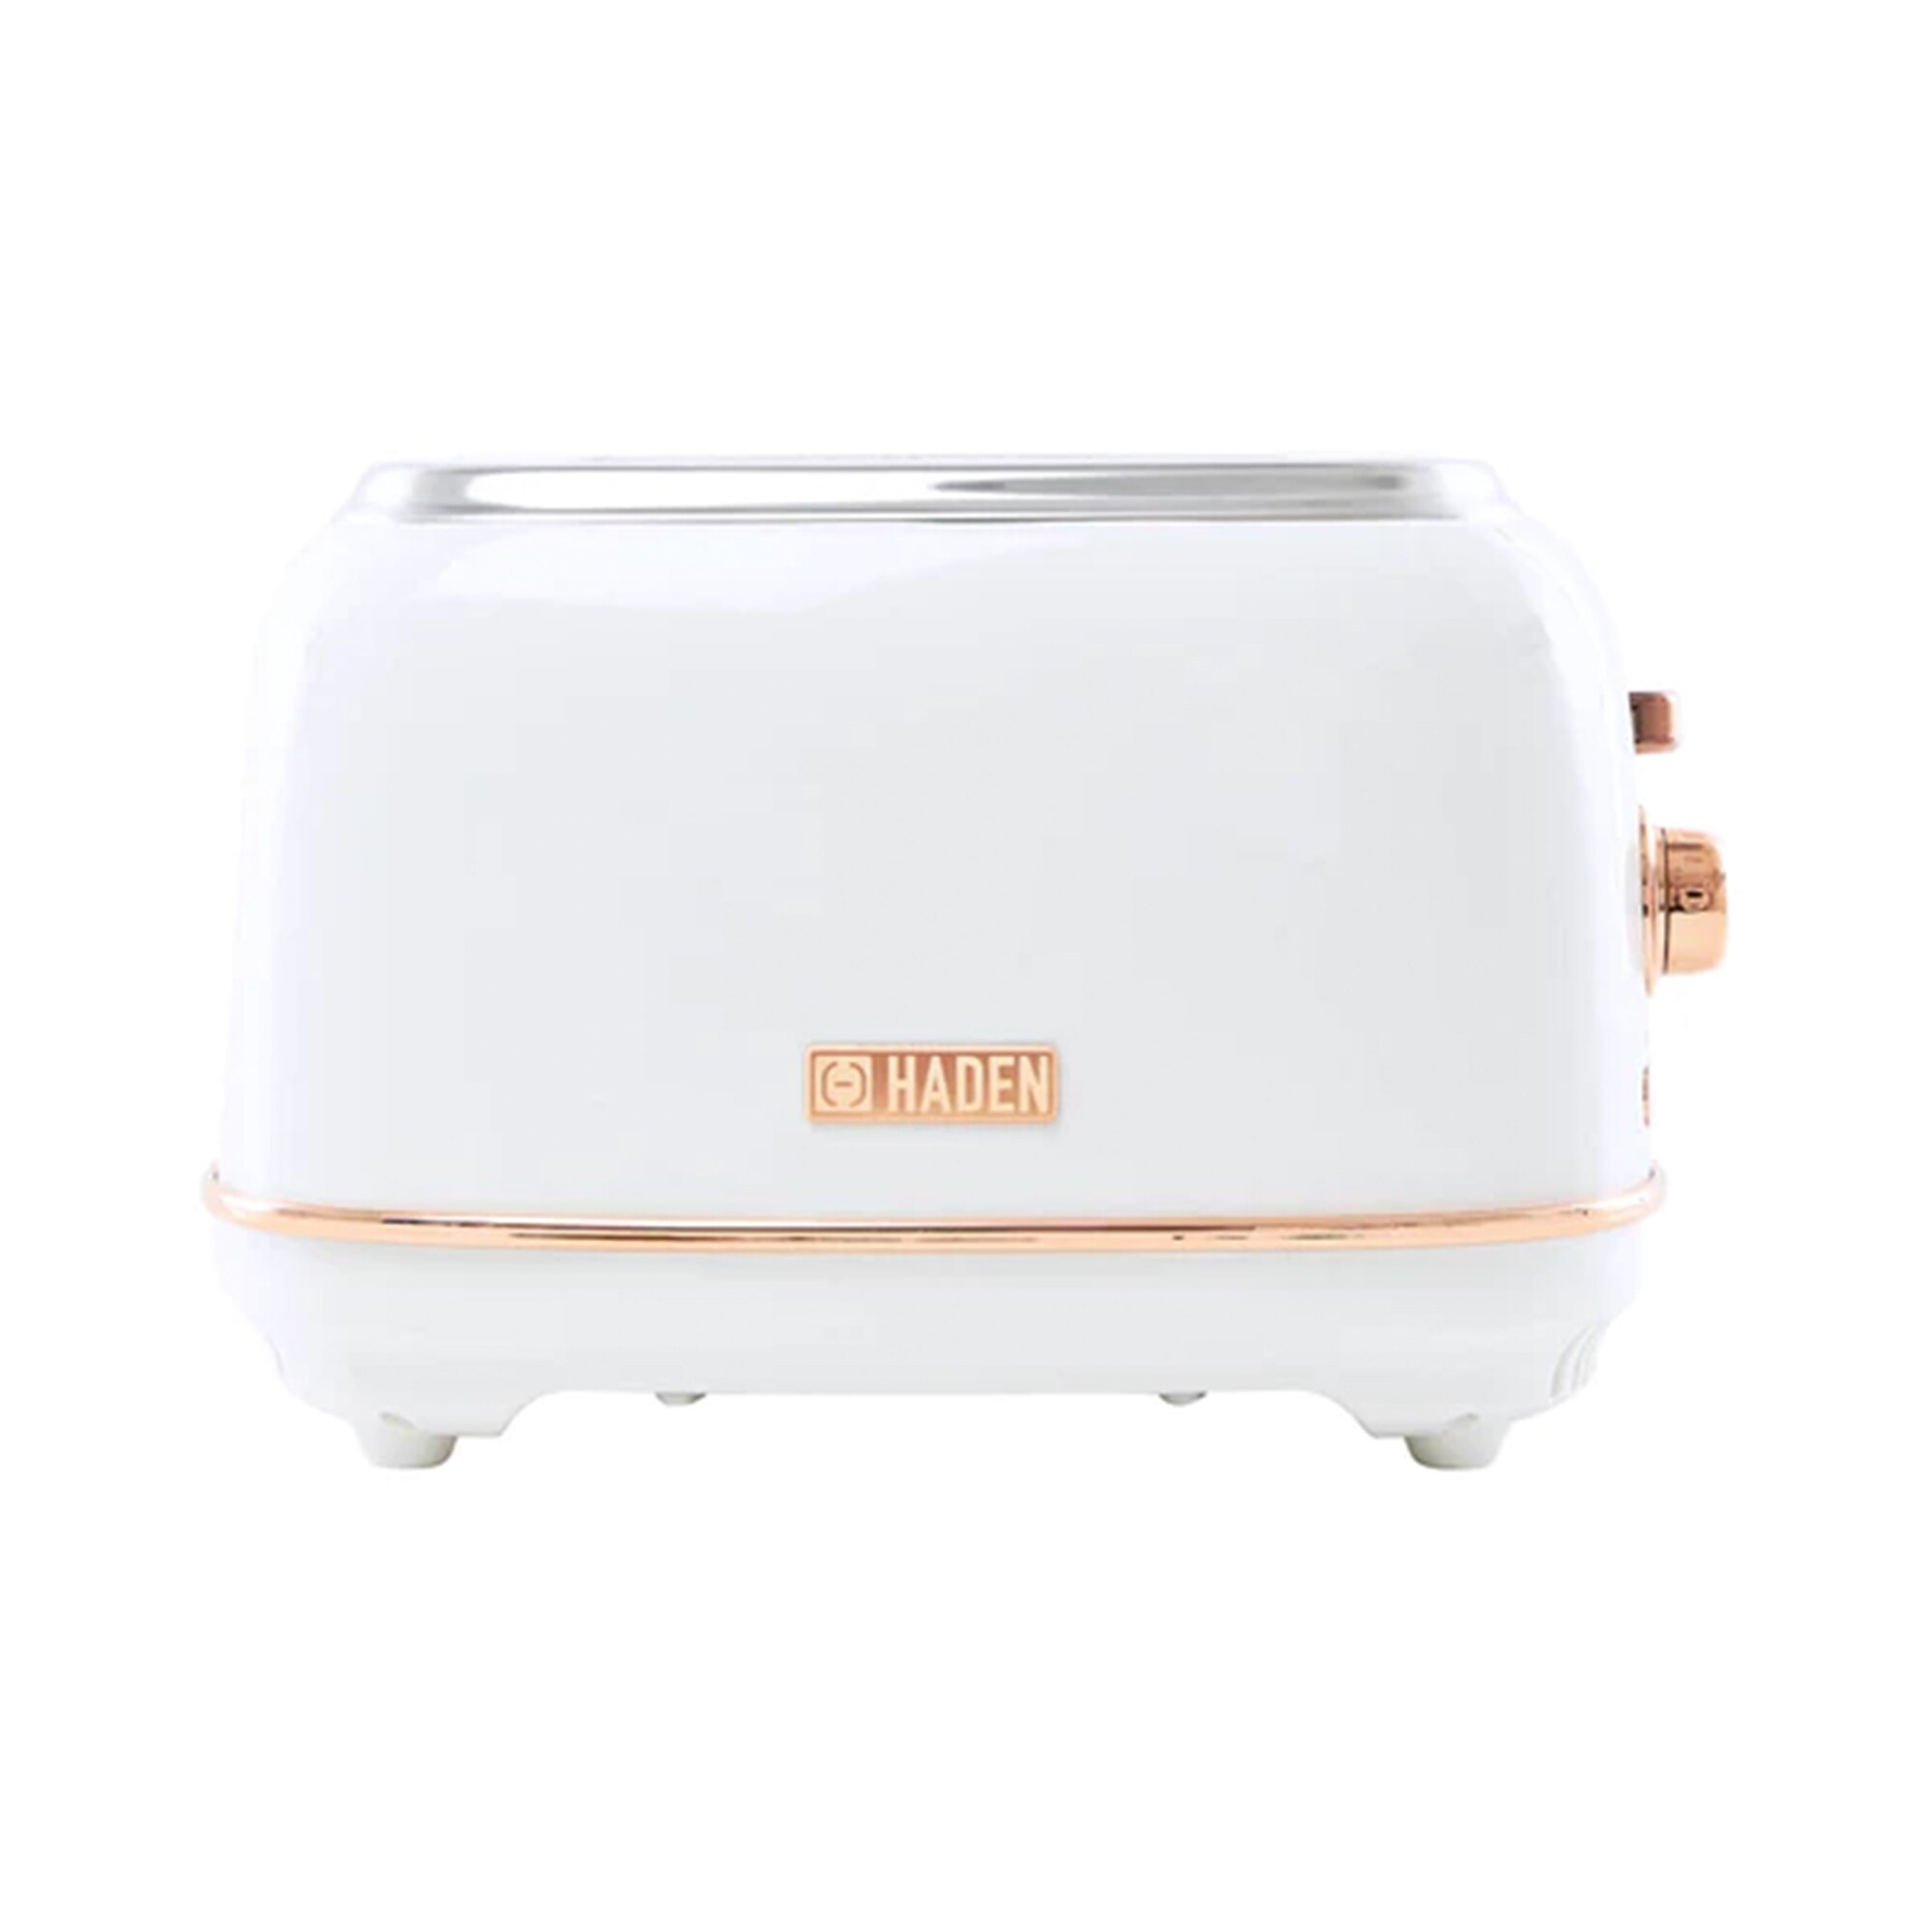 https://ak1.ostkcdn.com/images/products/is/images/direct/66b4a2338285c34c3b5865fc24154111c5d28a2e/Haden-Heritage-2-Slice-Wide-Slot-Toaster-with-Removable-Crumb-Tray%2C-Ivory-Copper.jpg